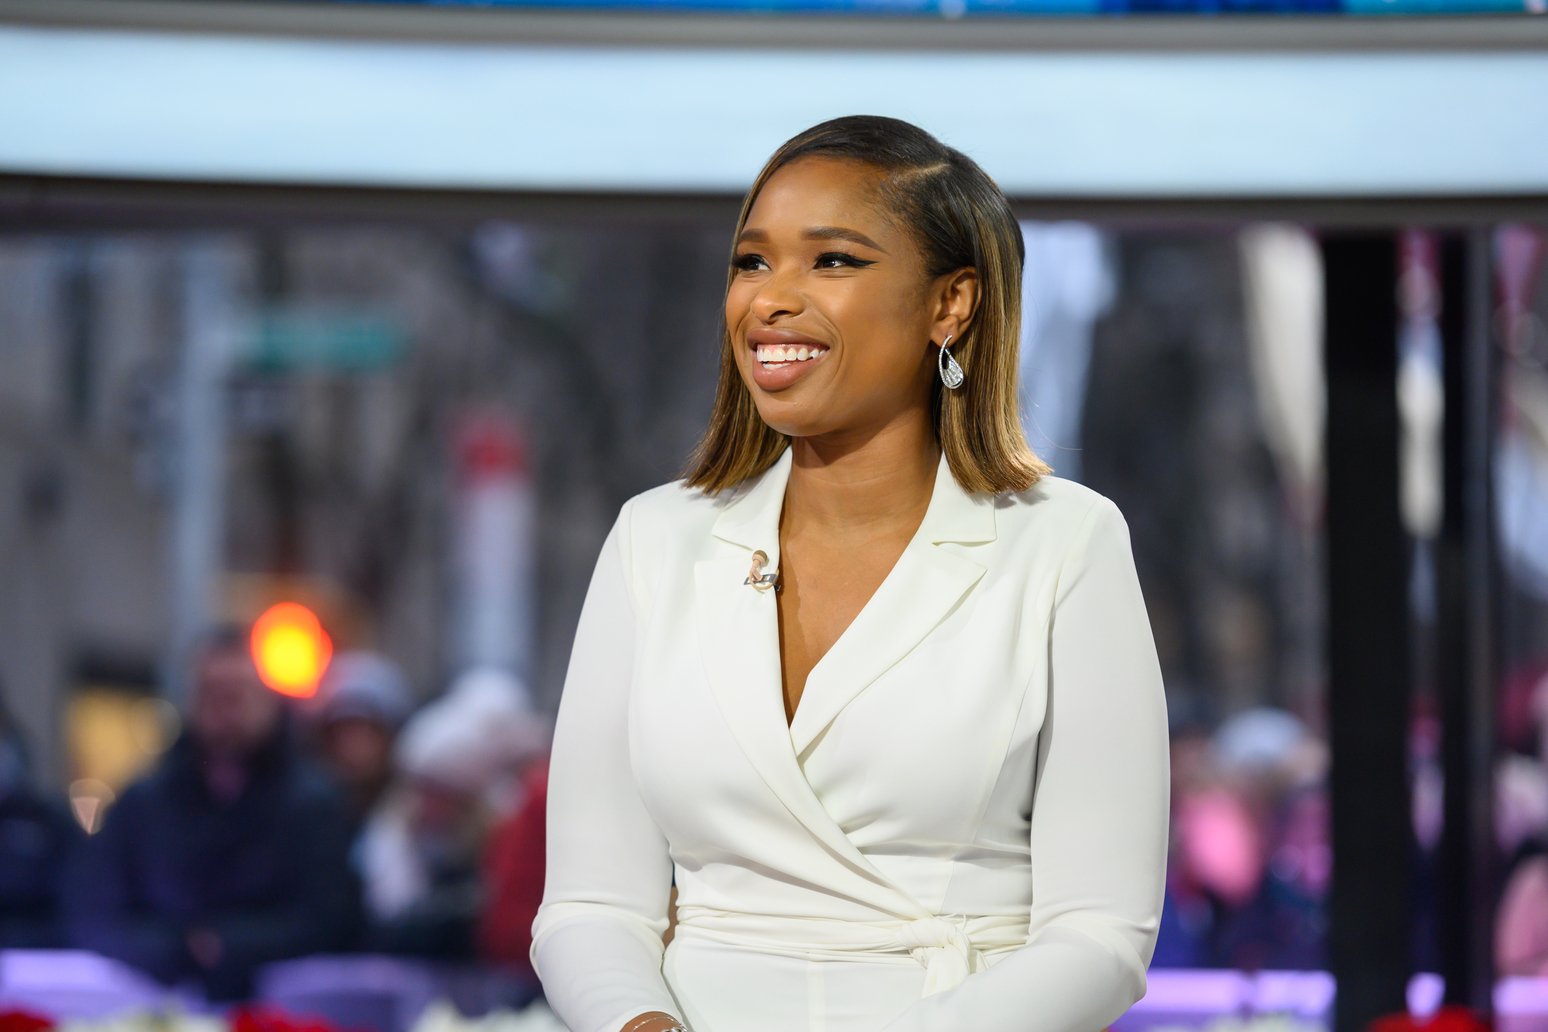 TODAY -- Pictured: Jennifer Hudson on Monday, December 16, 2019 | Photo: GettyImages